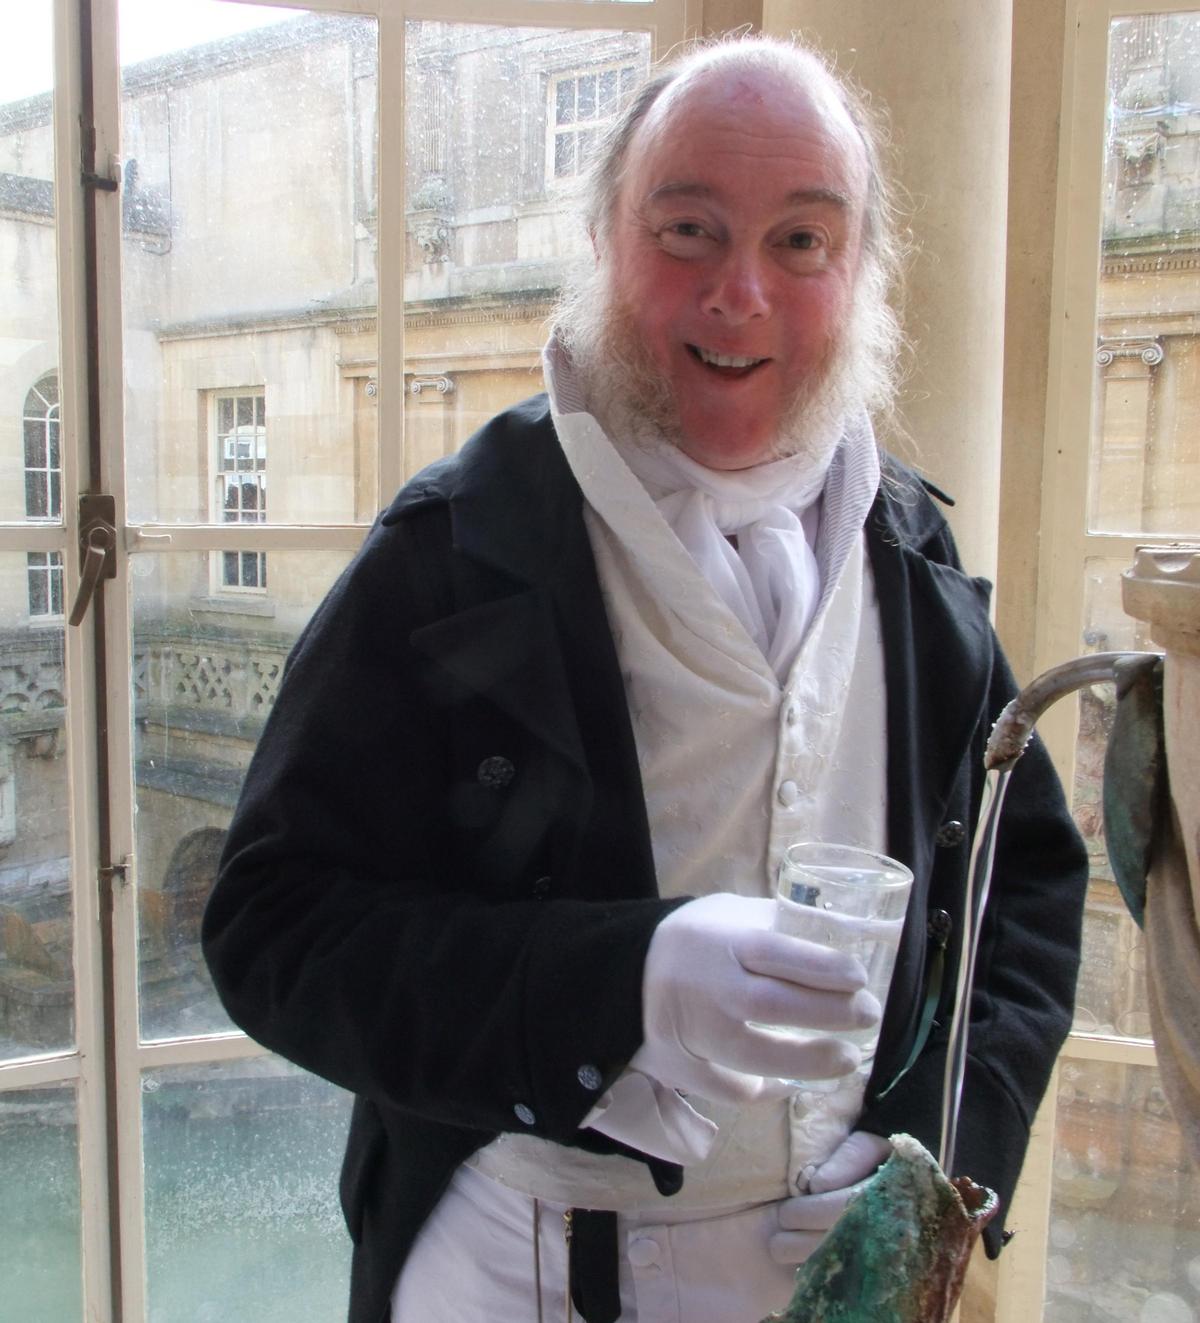 Visitors can sample the water at the Bath's historic Pump Room